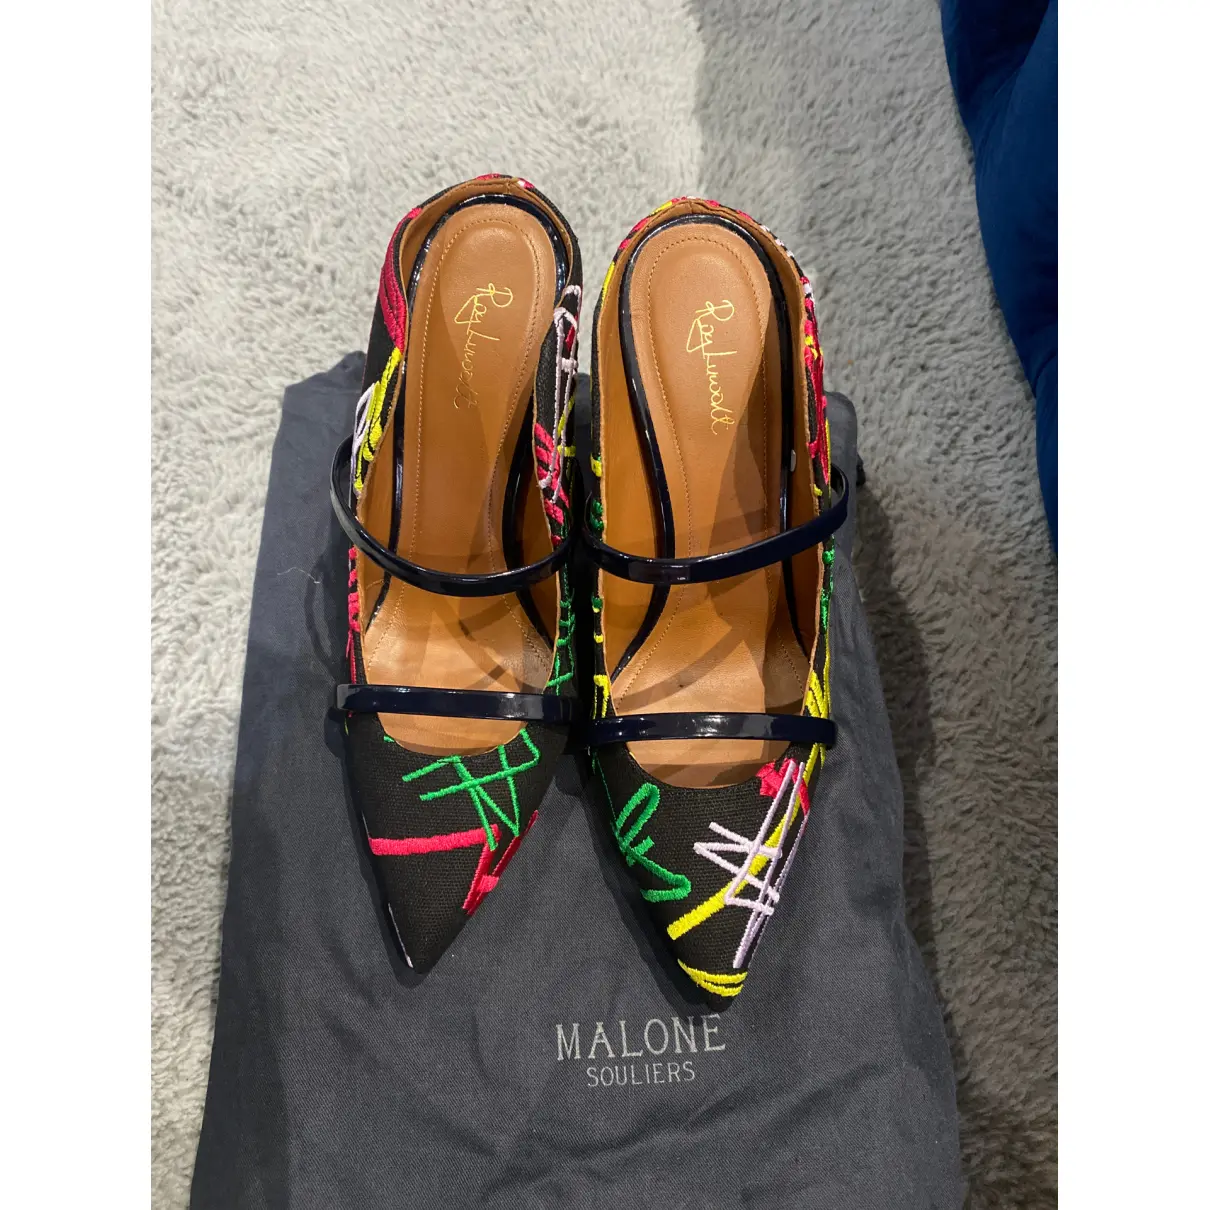 Buy Malone Souliers Maureen cloth sandals online